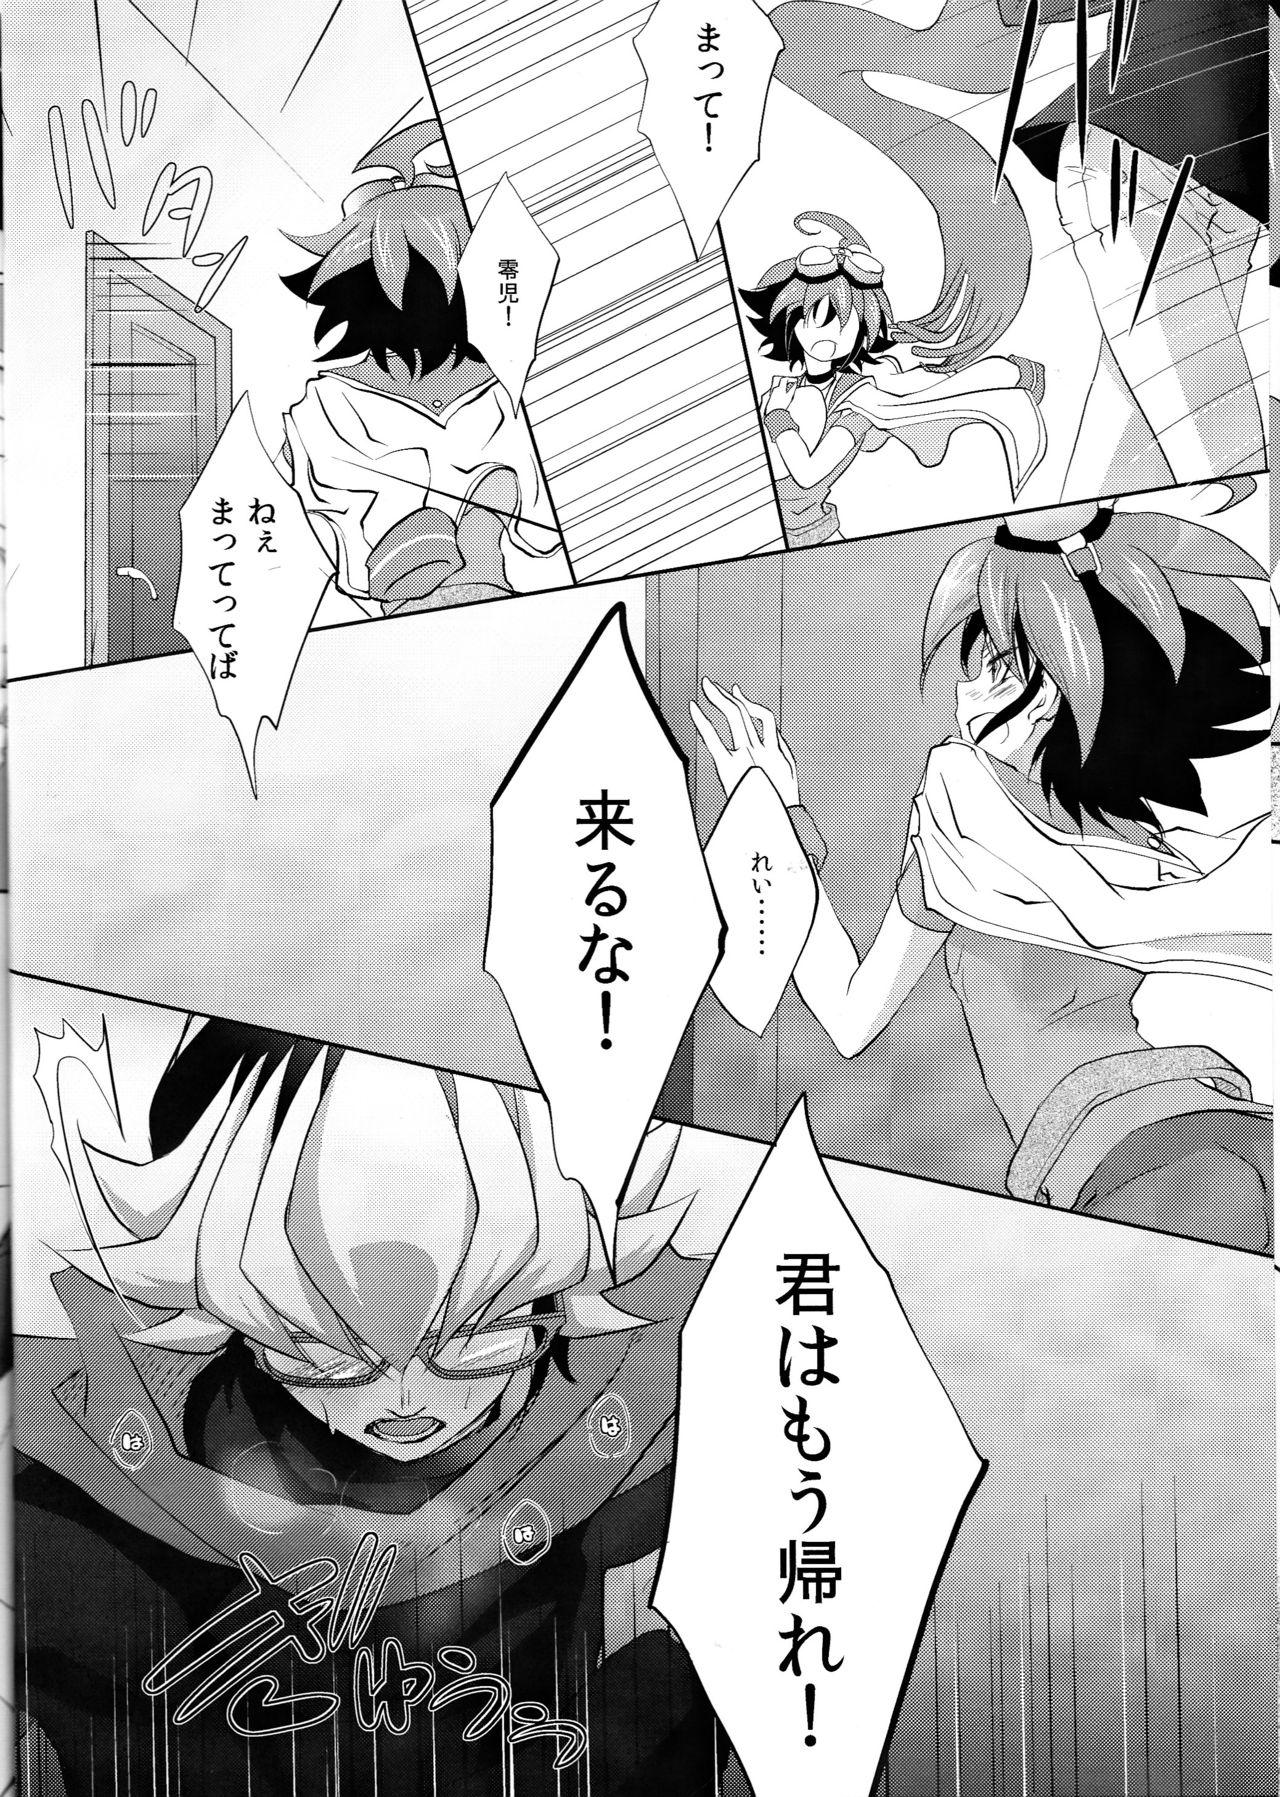 Parties Beast Eyes - Yu-gi-oh arc-v Face Sitting - Page 6